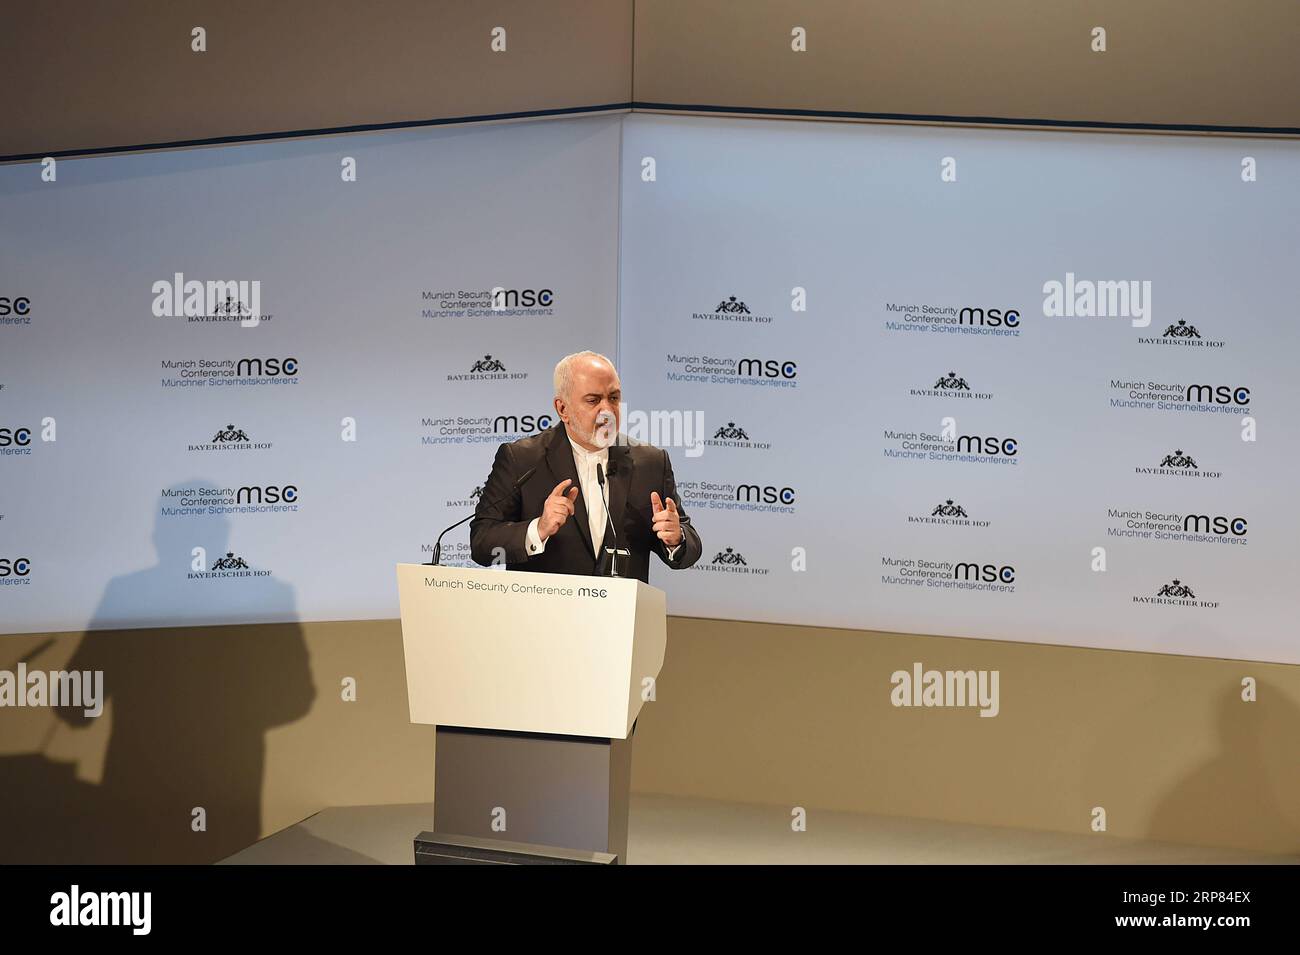 (190217) -- MUNICH, Feb. 17, 2019 (Xinhua) -- Iranian Foreign Minister Mohammad Javad Zarif addresses the 55th Munich Security Conference (MSC) in Munich, Germany, on Feb. 17, 2019. Zarif on Sunday urged European powers to do more to save the nuclear deal with the Islamic republic, and accused Washington of having an obsession with Iran. (Xinhua/Lu Yang) GERMANY-MUNICH-MSC-IRANIAN FM PUBLICATIONxNOTxINxCHN Stock Photo